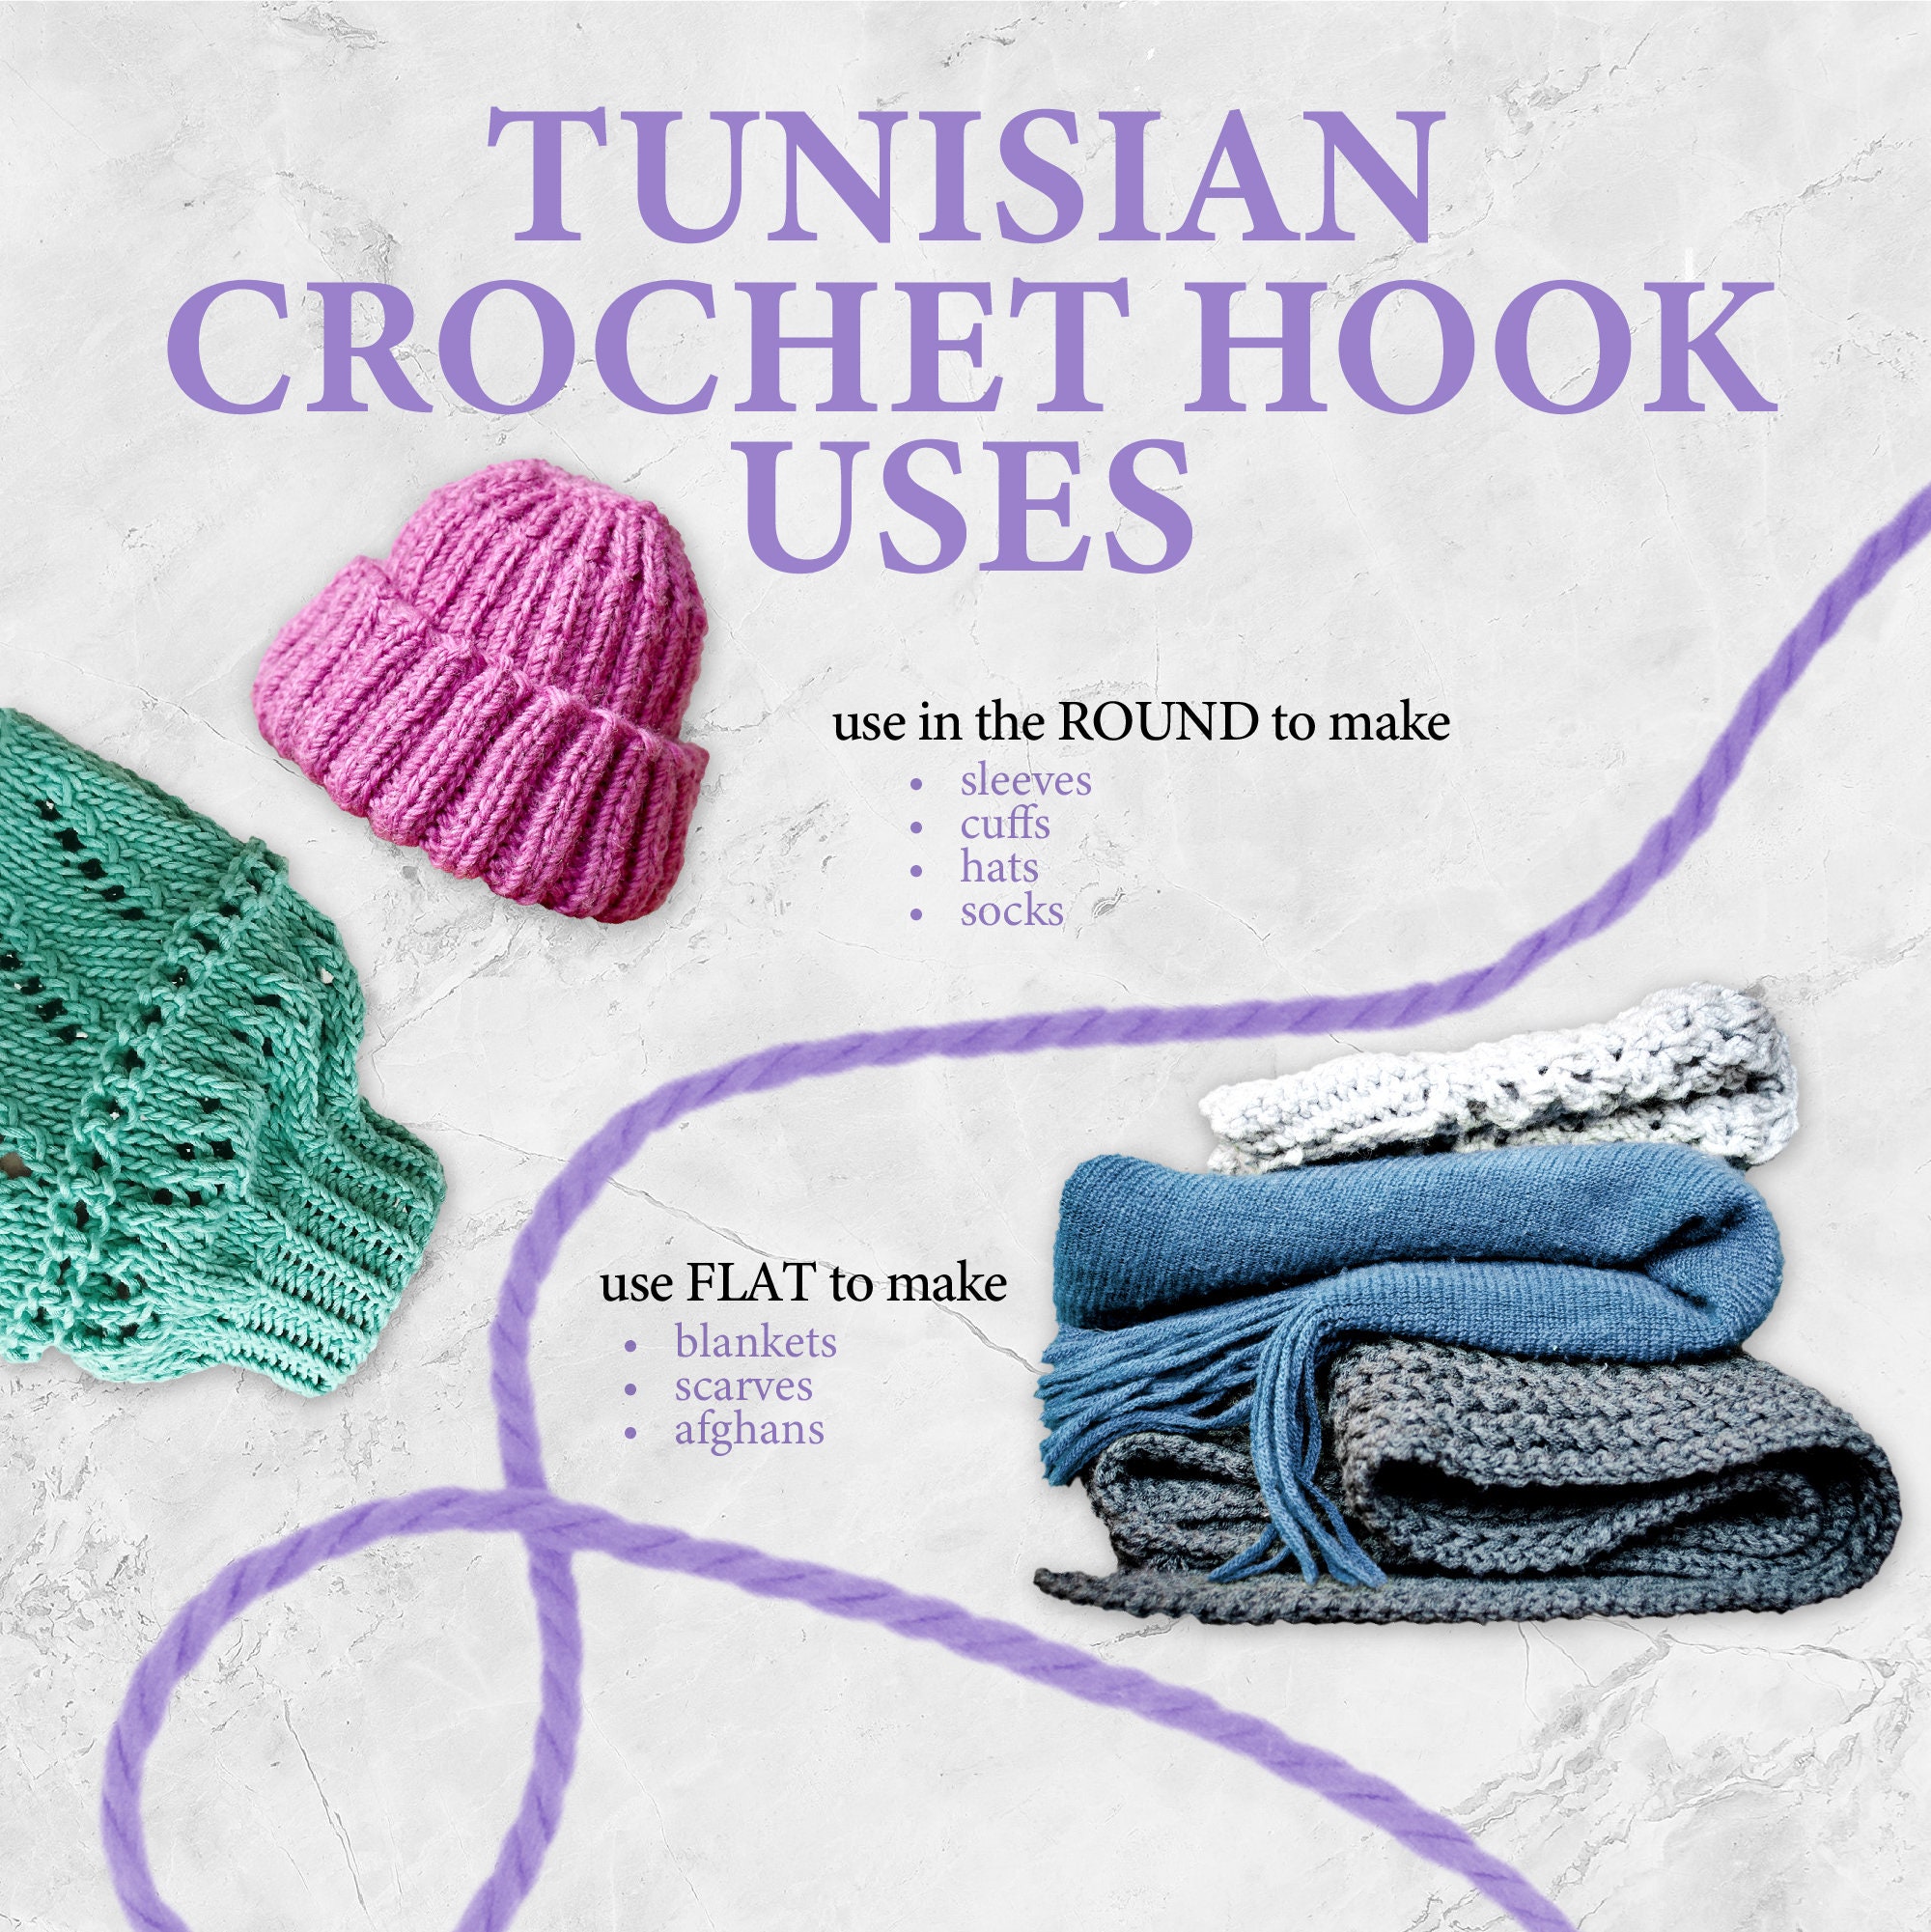 Buy Tunisian Crochet Hooks With Cable Chords, Wooden Hooks, Afghan